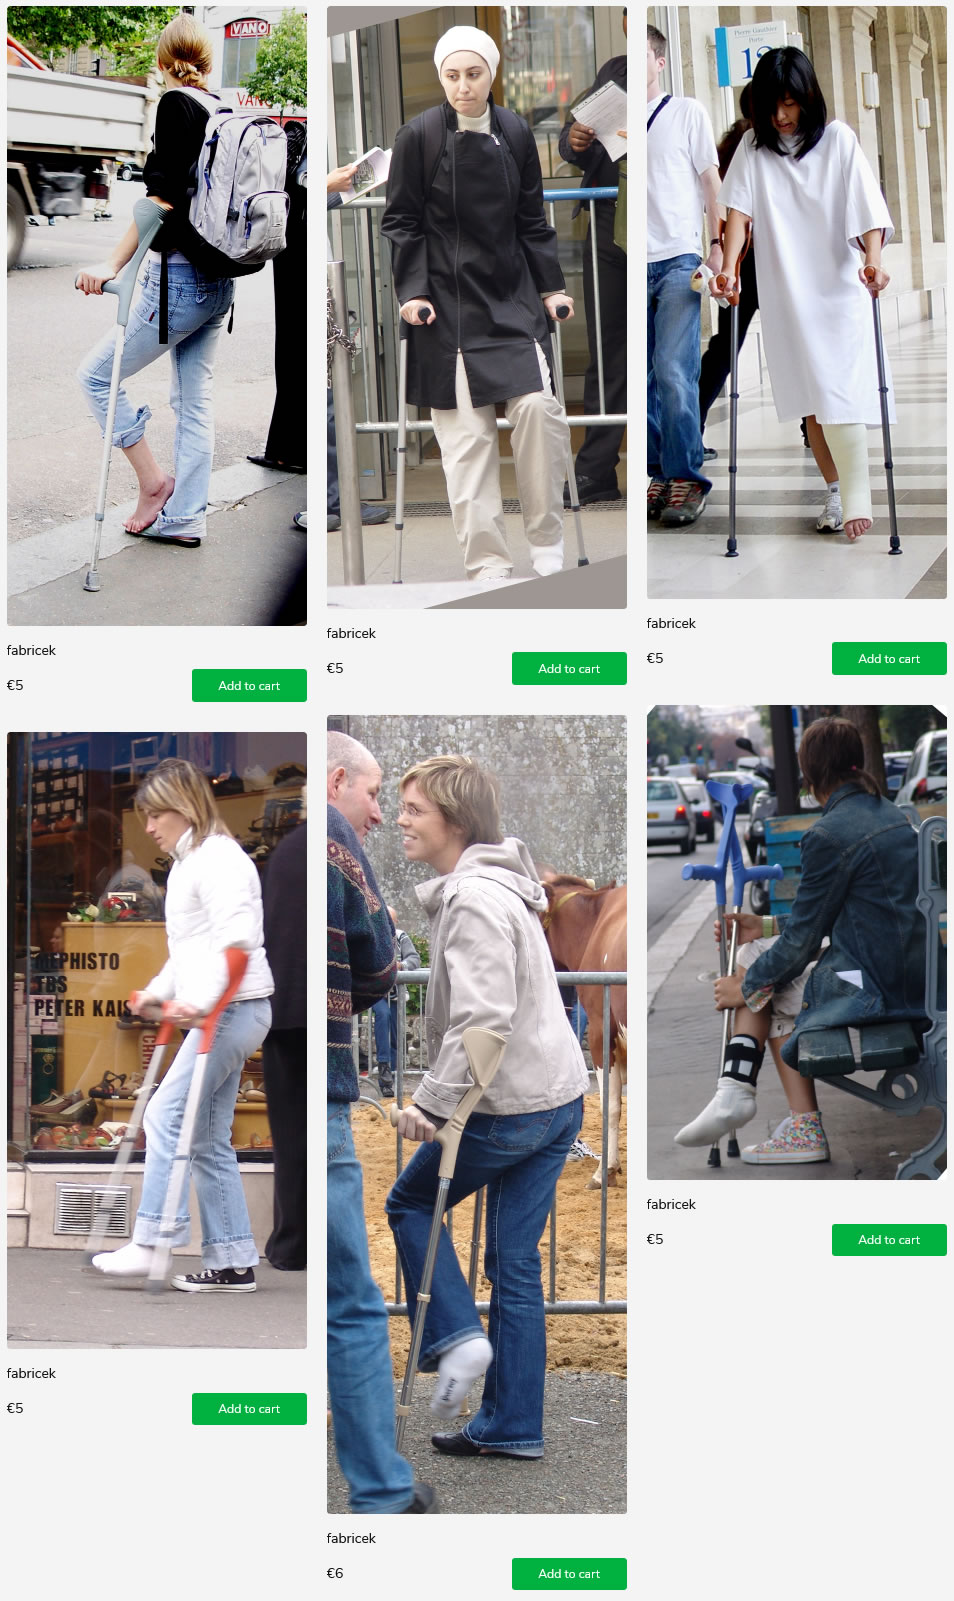 6 sets of women on crutches - in casts, braces and barefoot